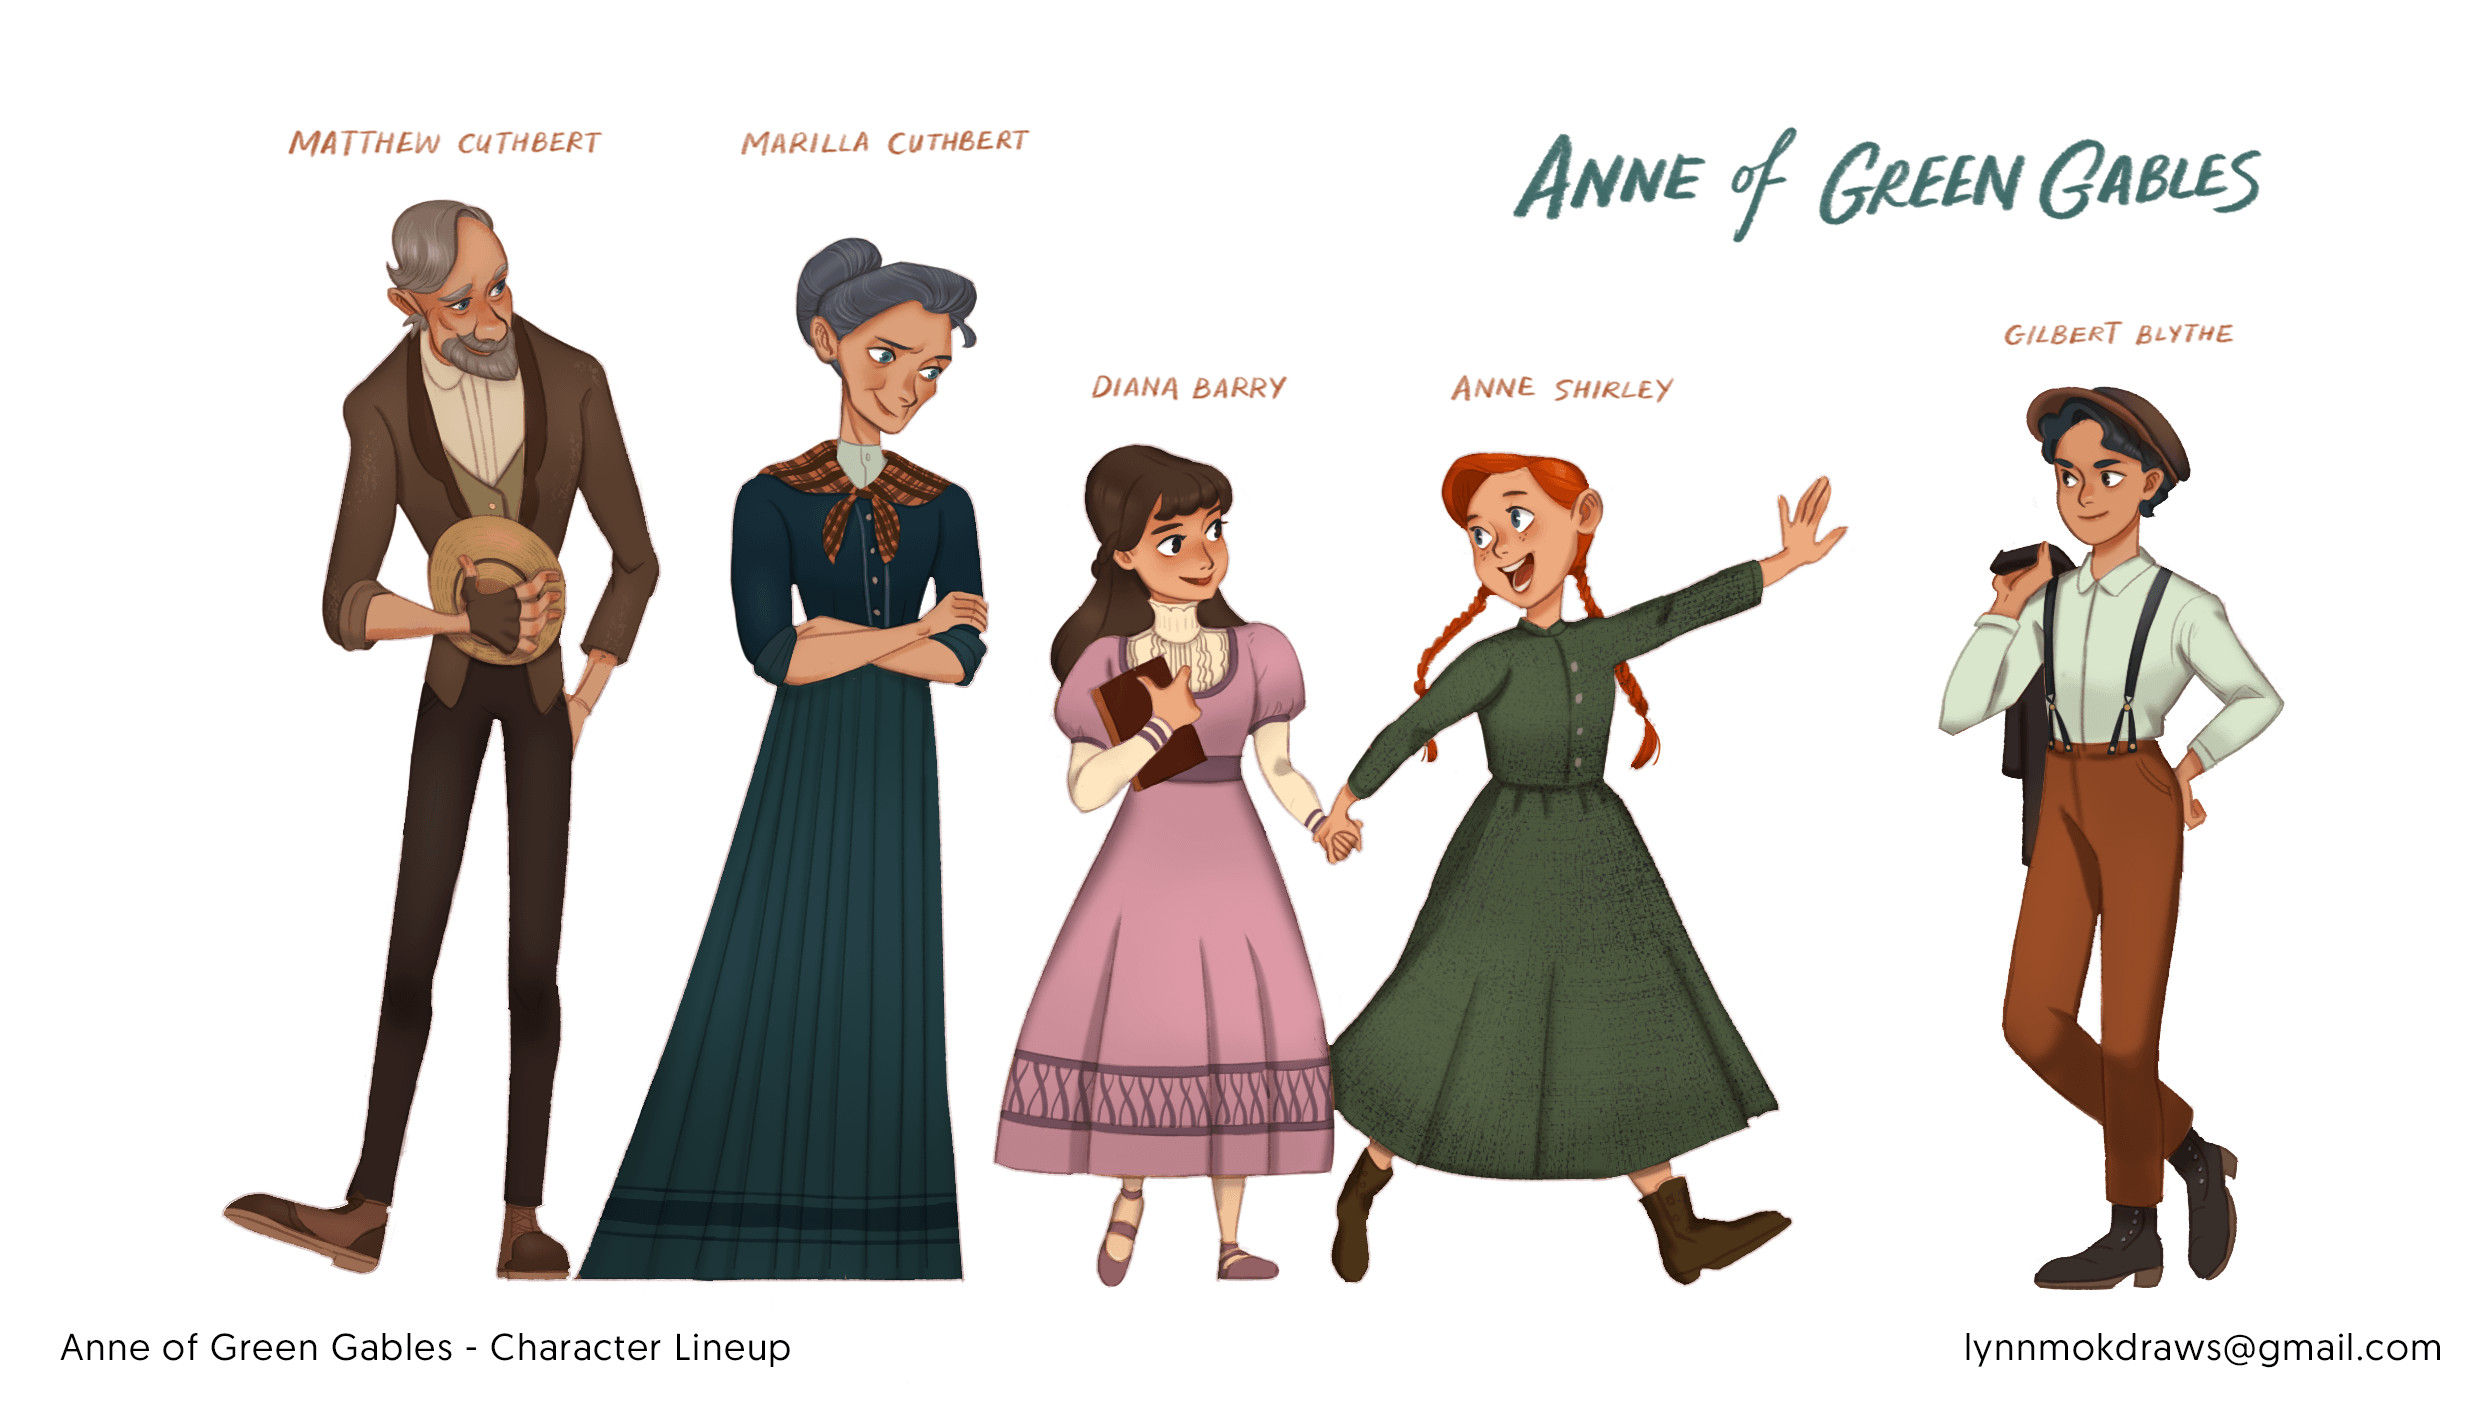 Characters in their respective Edwardian Era costumes